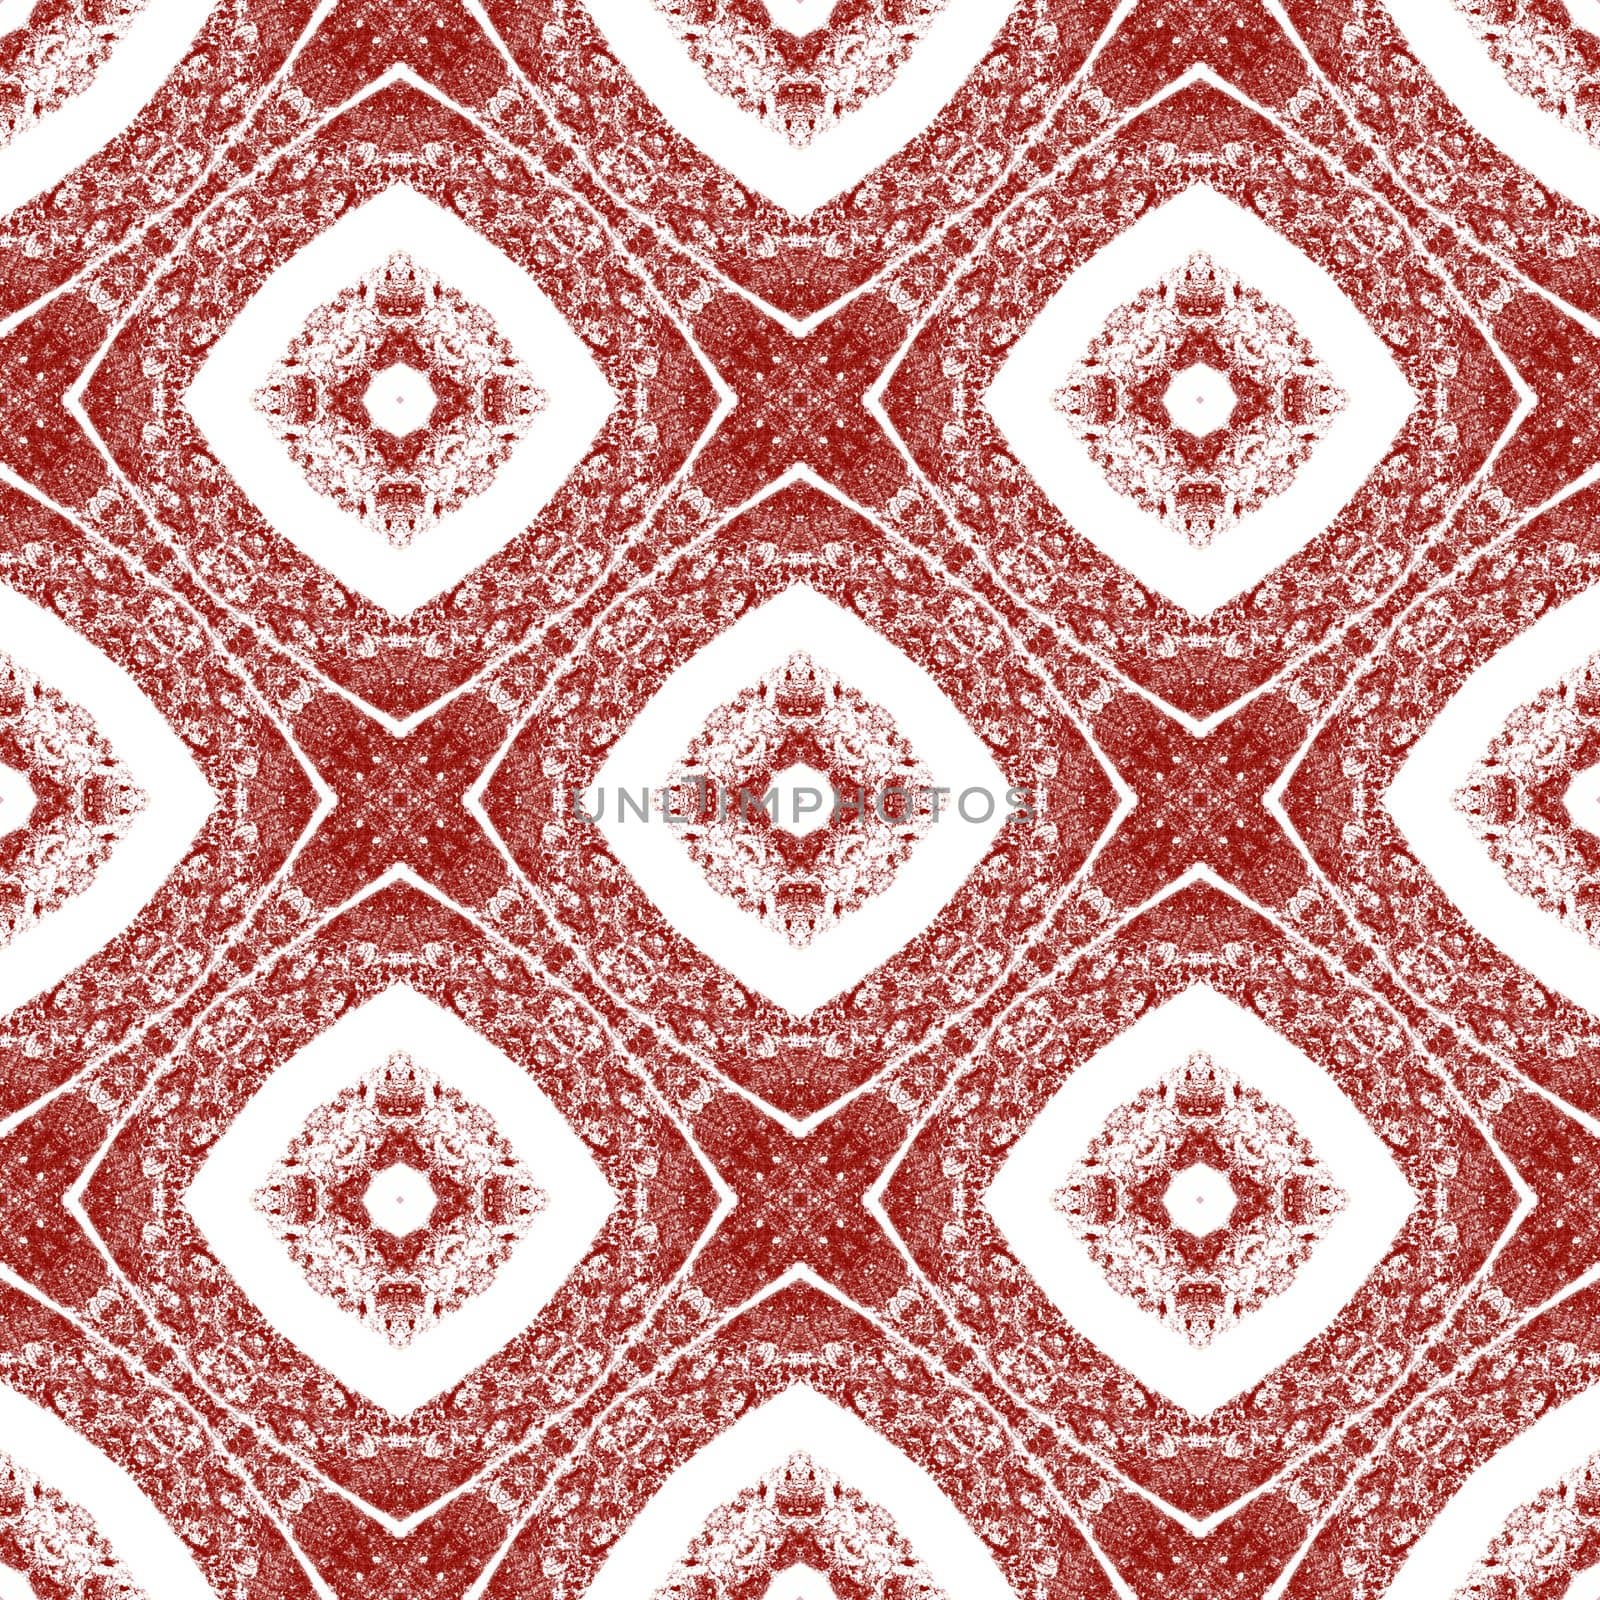 Ethnic hand painted pattern. Wine red symmetrical kaleidoscope background. Textile ready mesmeric print, swimwear fabric, wallpaper, wrapping. Summer dress ethnic hand painted tile.